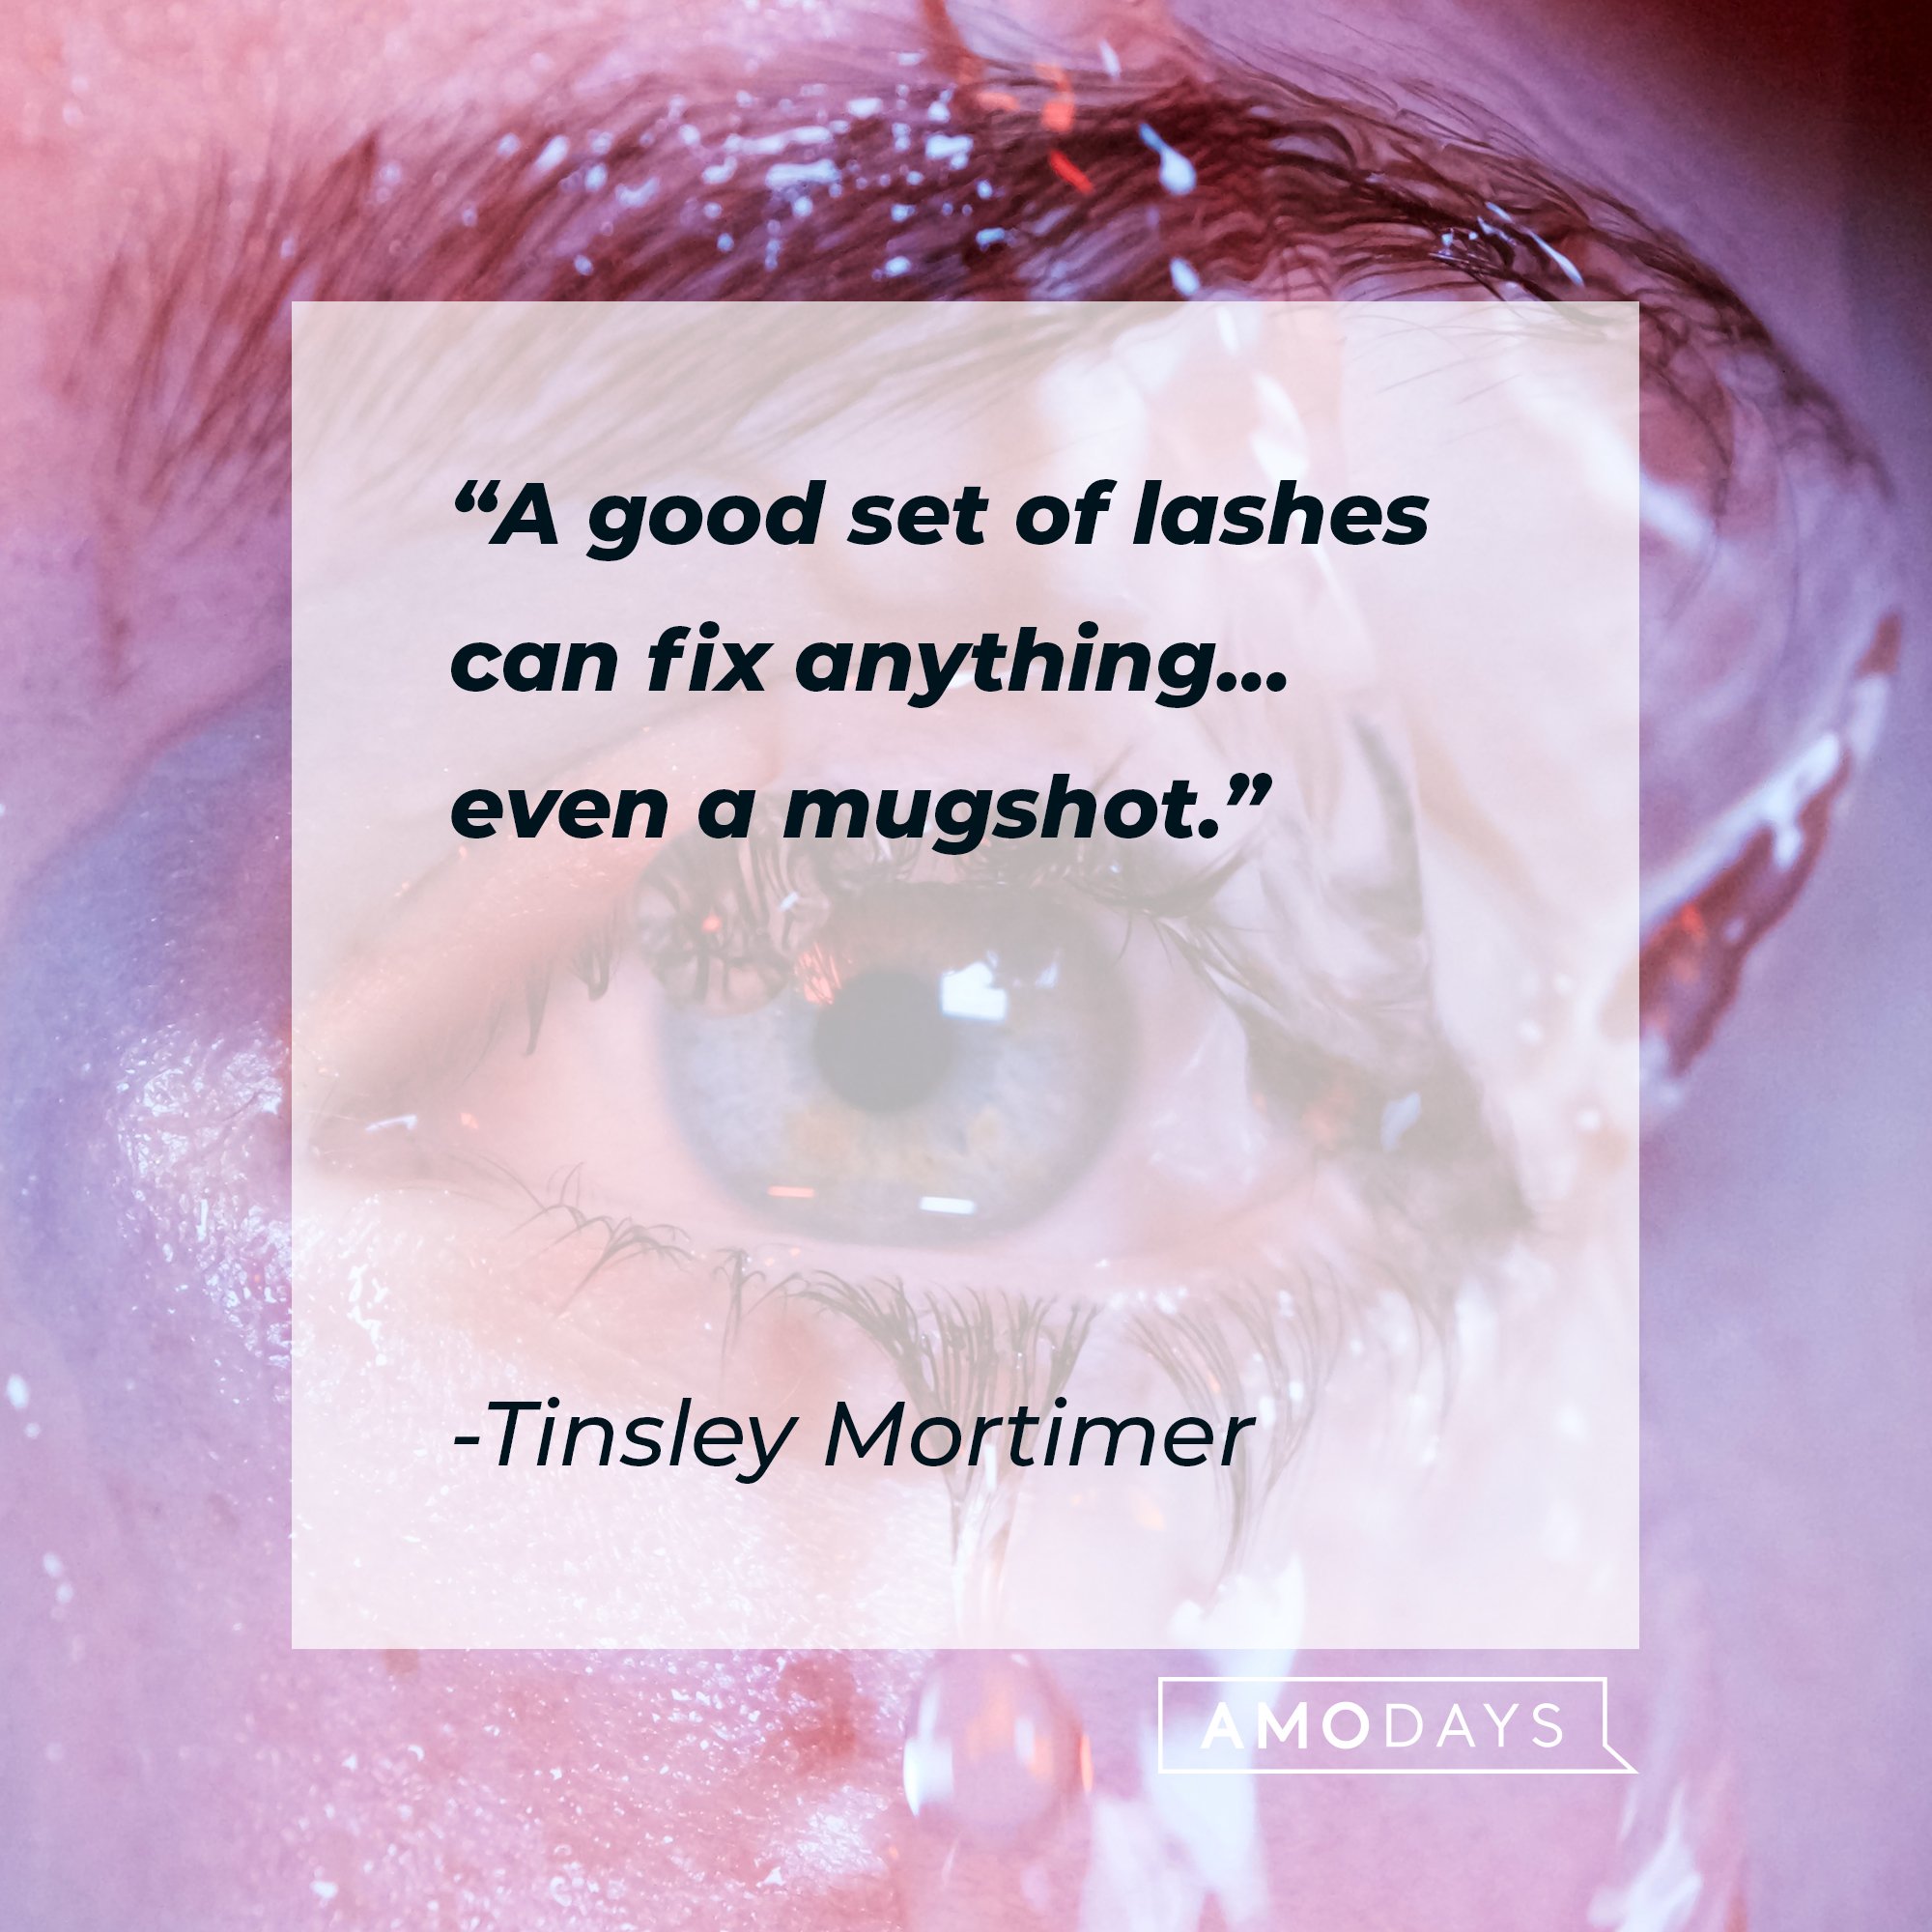  Tinsley Mortimer’s quote: "A good set of lashes can fix anything… even a mugshot."  | Image: AmoDays